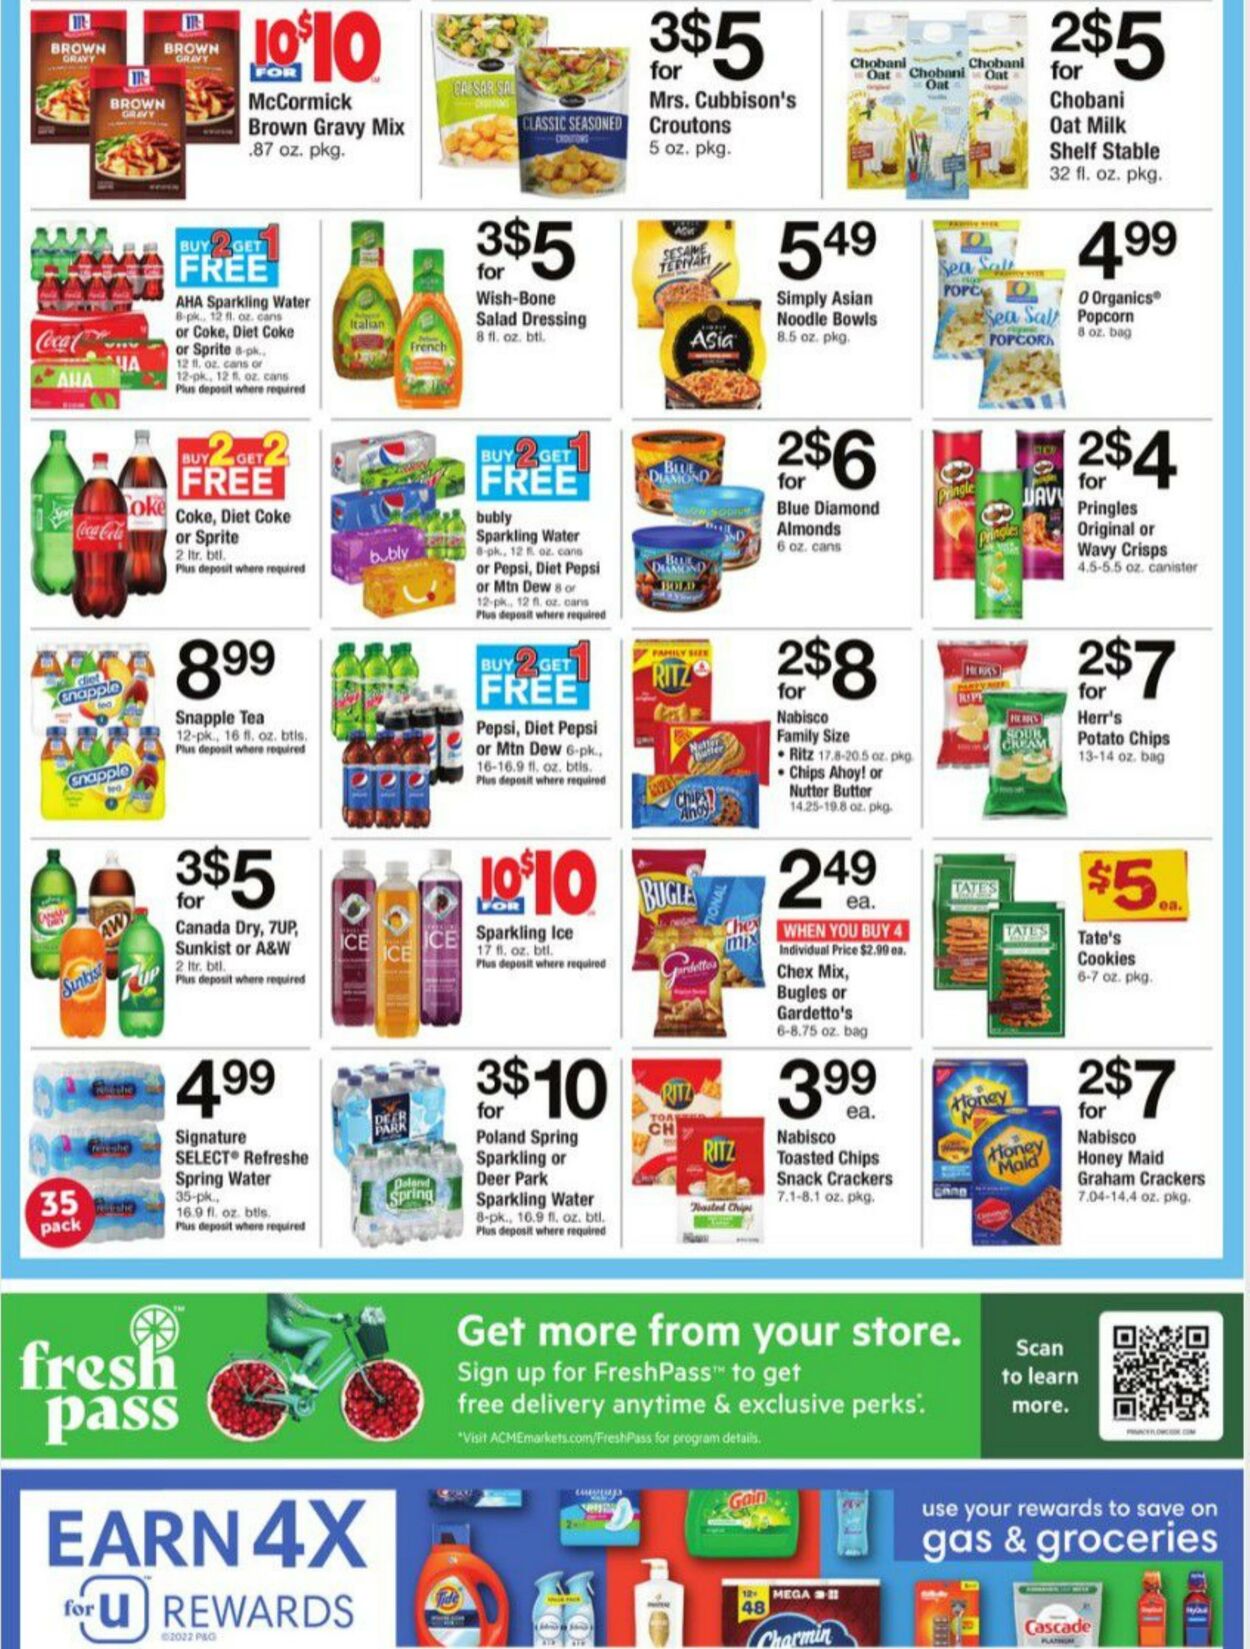 Weekly ad Acme 01/20/2023 - 01/26/2023